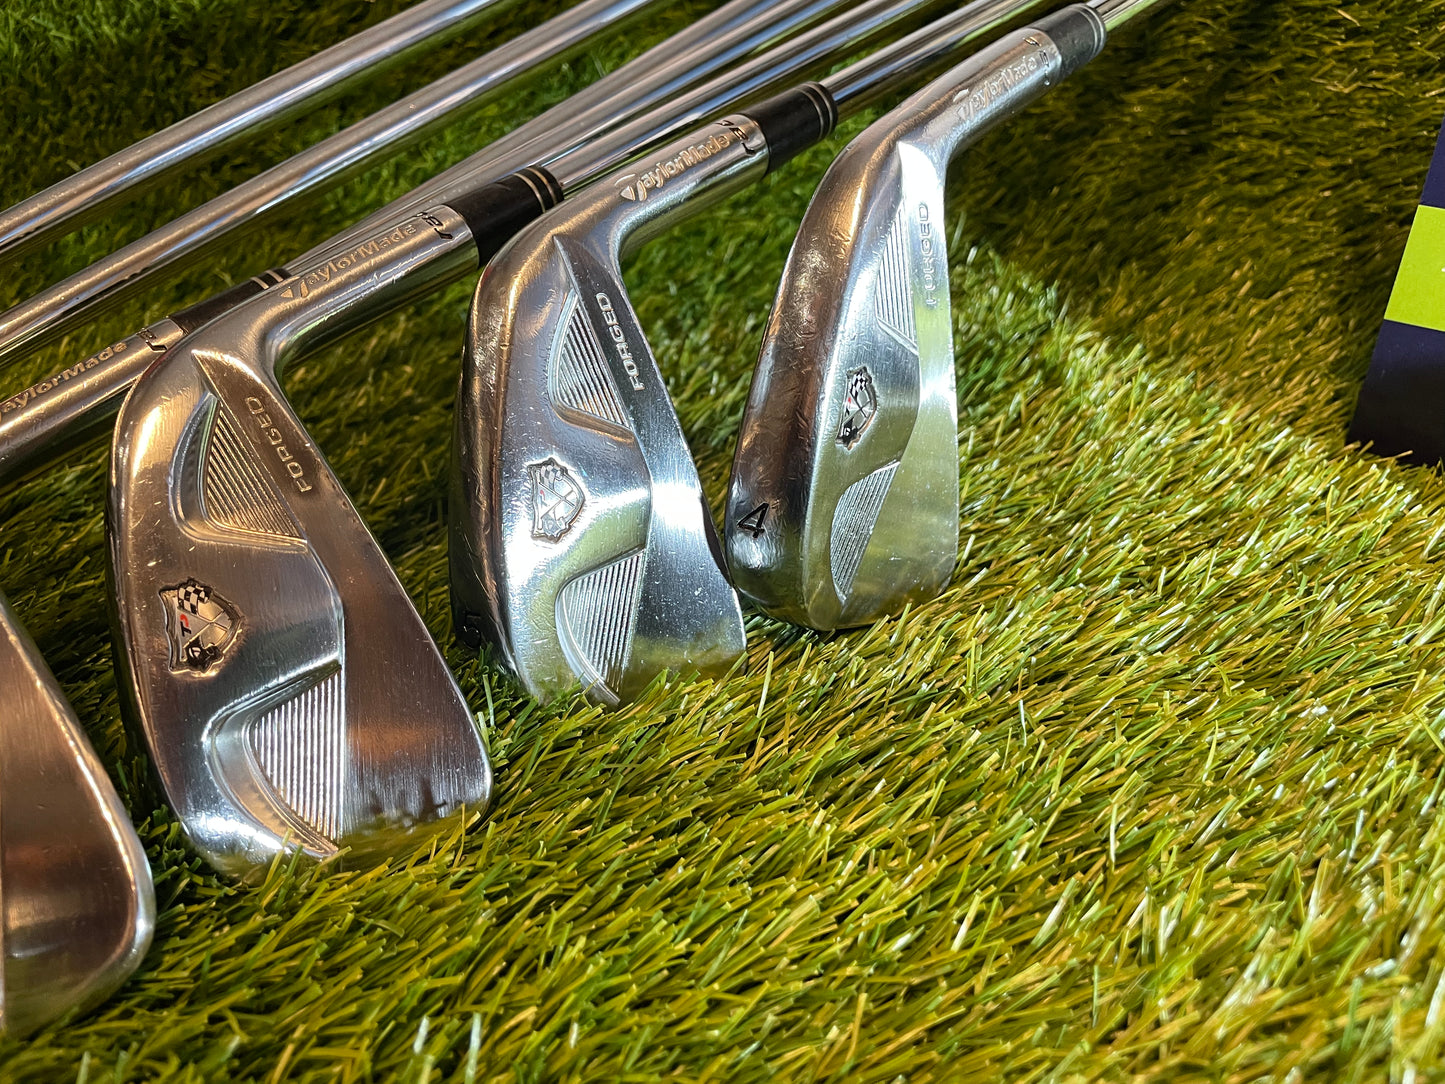 TAYLORMADE TOUR PREFERRED STUNNING IRONS 4-PW RIFLE 6.0 STIFF FLEX SHAFTS- FITTED WITH LAMKIN GRIPS